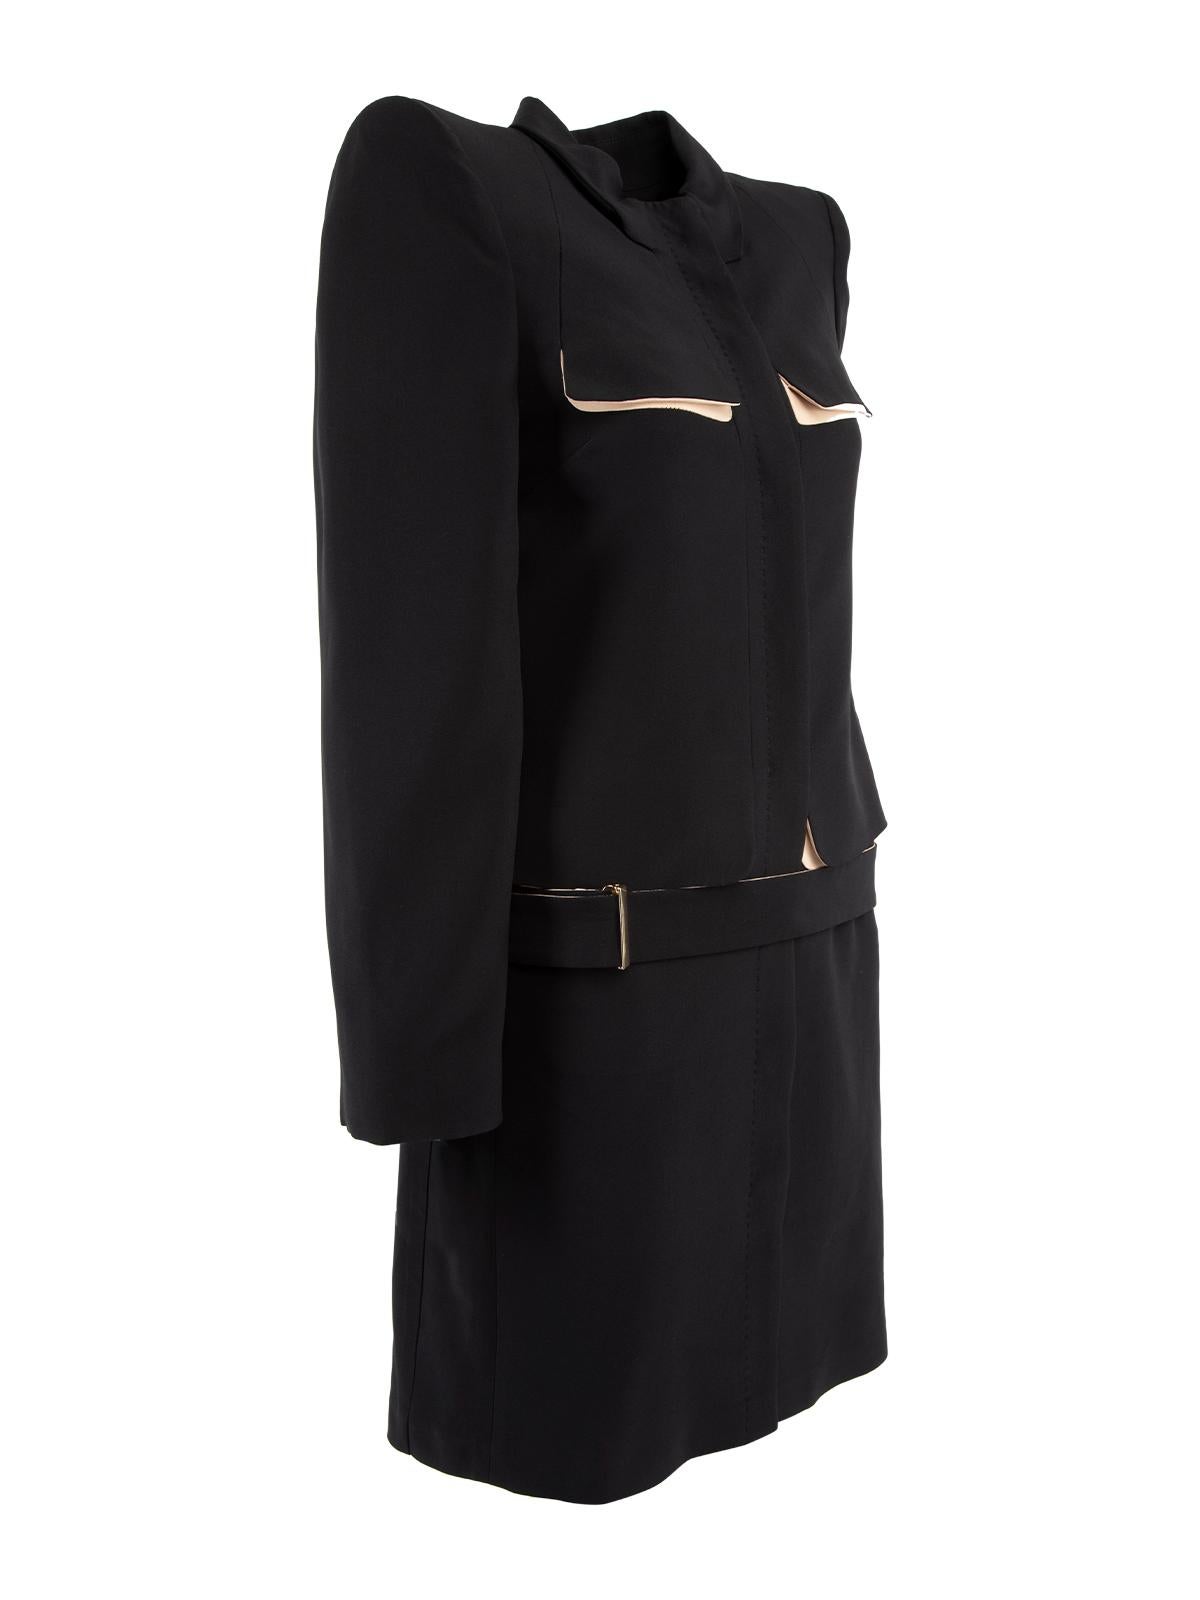 CONDITION is Very good. Hardly any visible wear to coat is evident on this used Alexander McQueen designer resale item.   Details  Black  Viscose  Trench style Shoulder pads Slim fit    Long sleeves Belt fastening     Button fastening   Made in